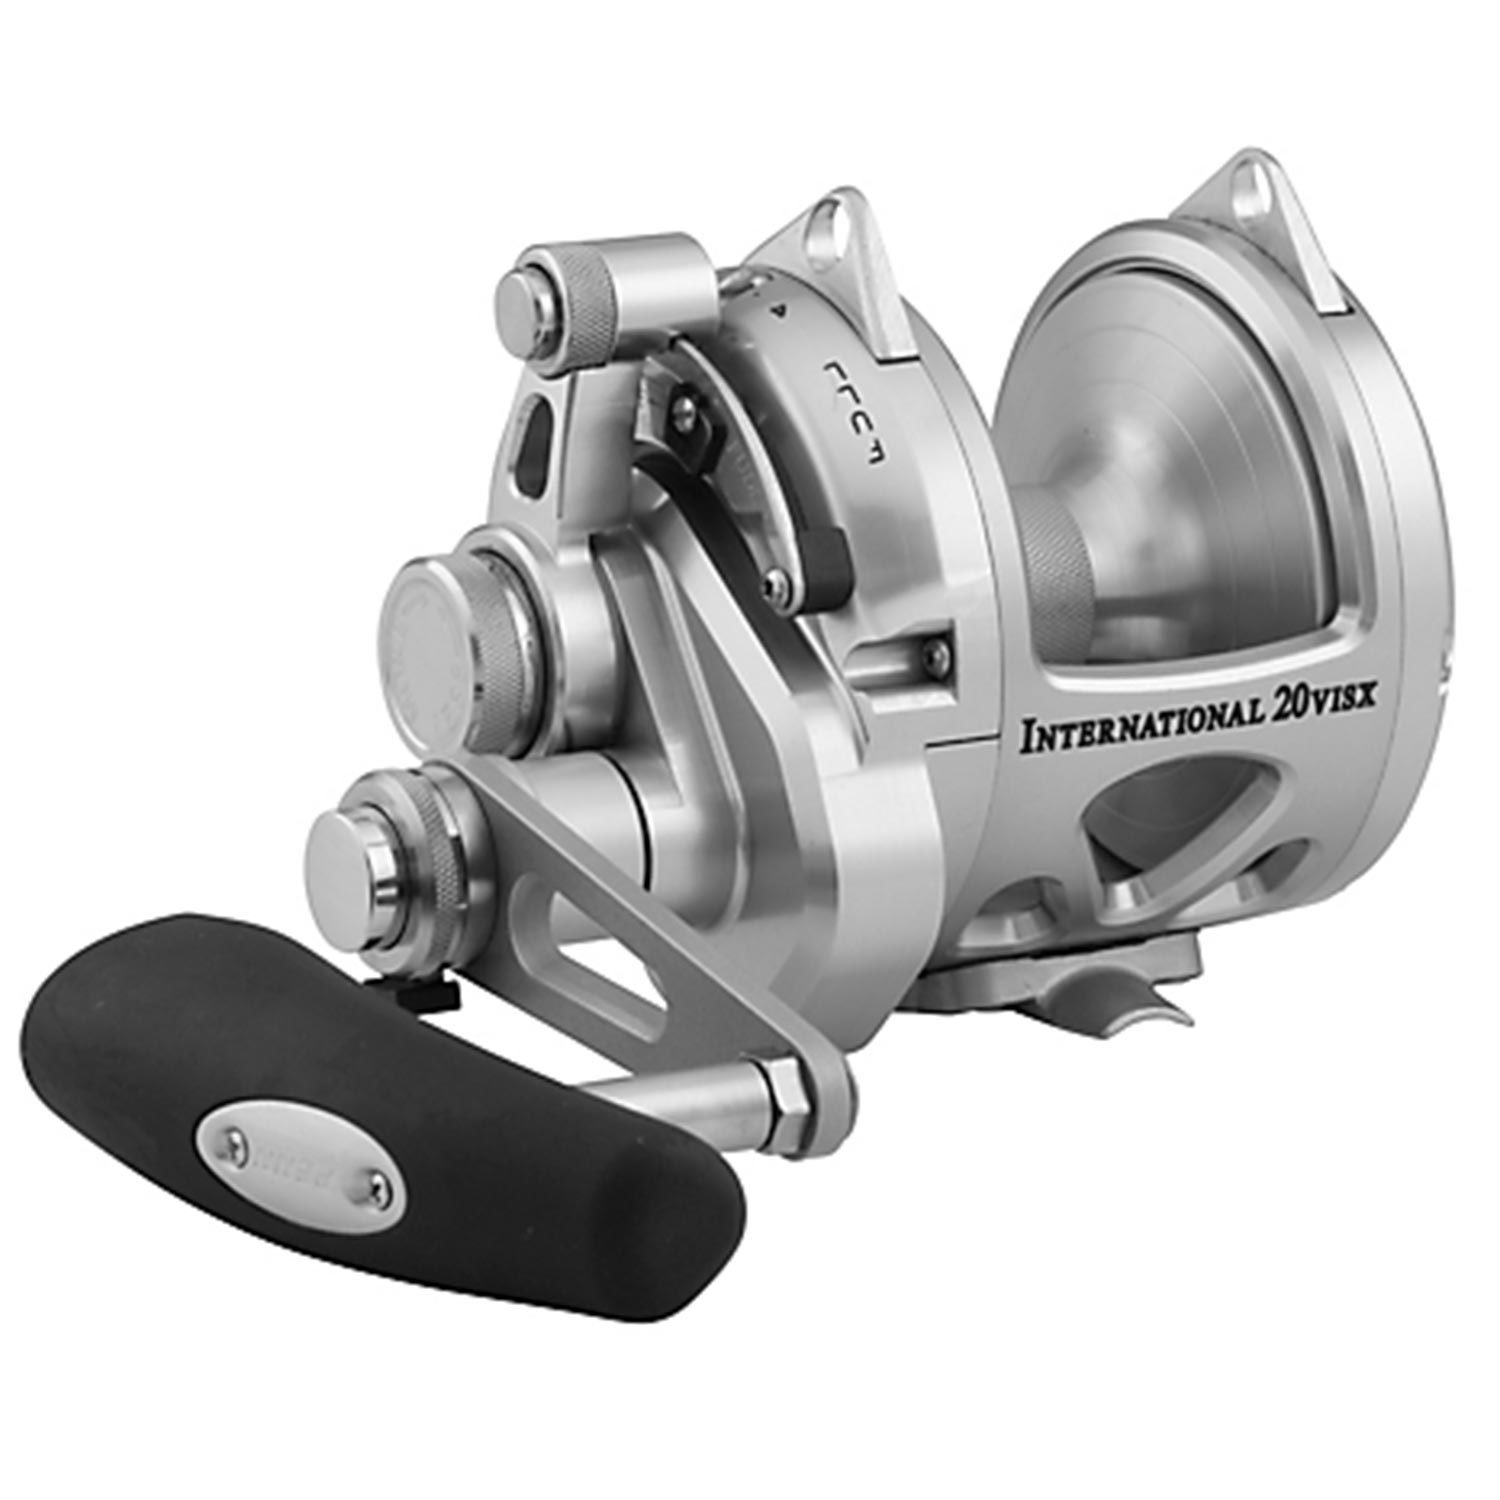 Dolphin Penn International 50wide Electric Reel for Sale in North